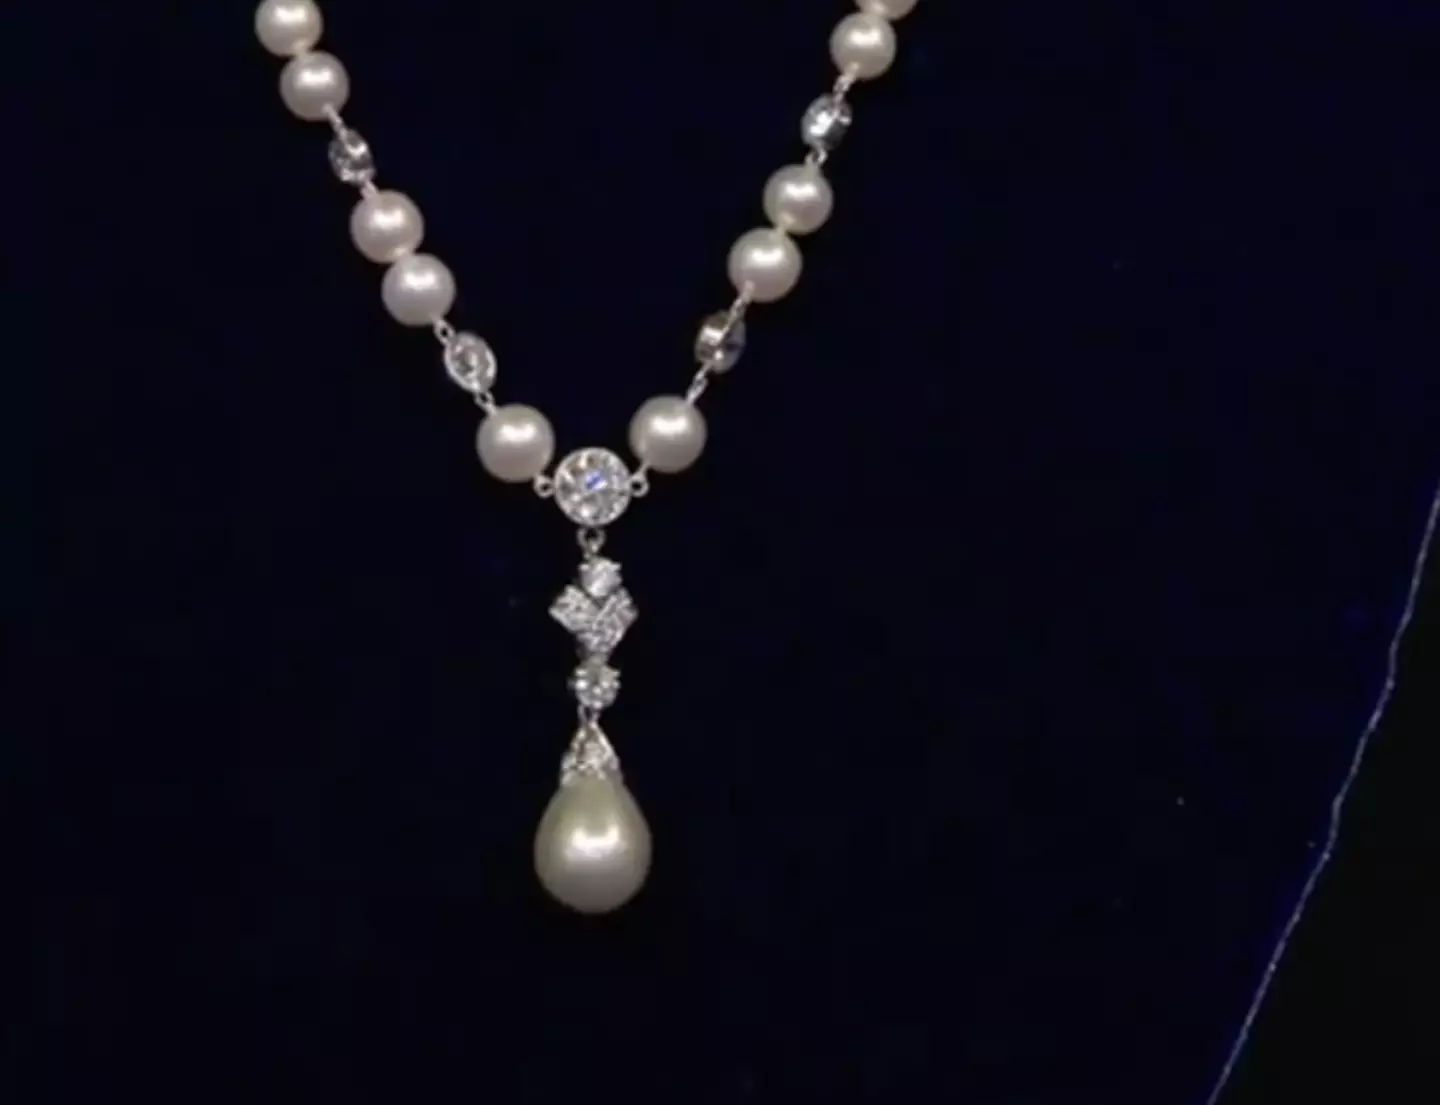 A woman was left in tears after Antiques Roadshow appraised her grandmother-in-law's pearl and diamond necklace (BBC)